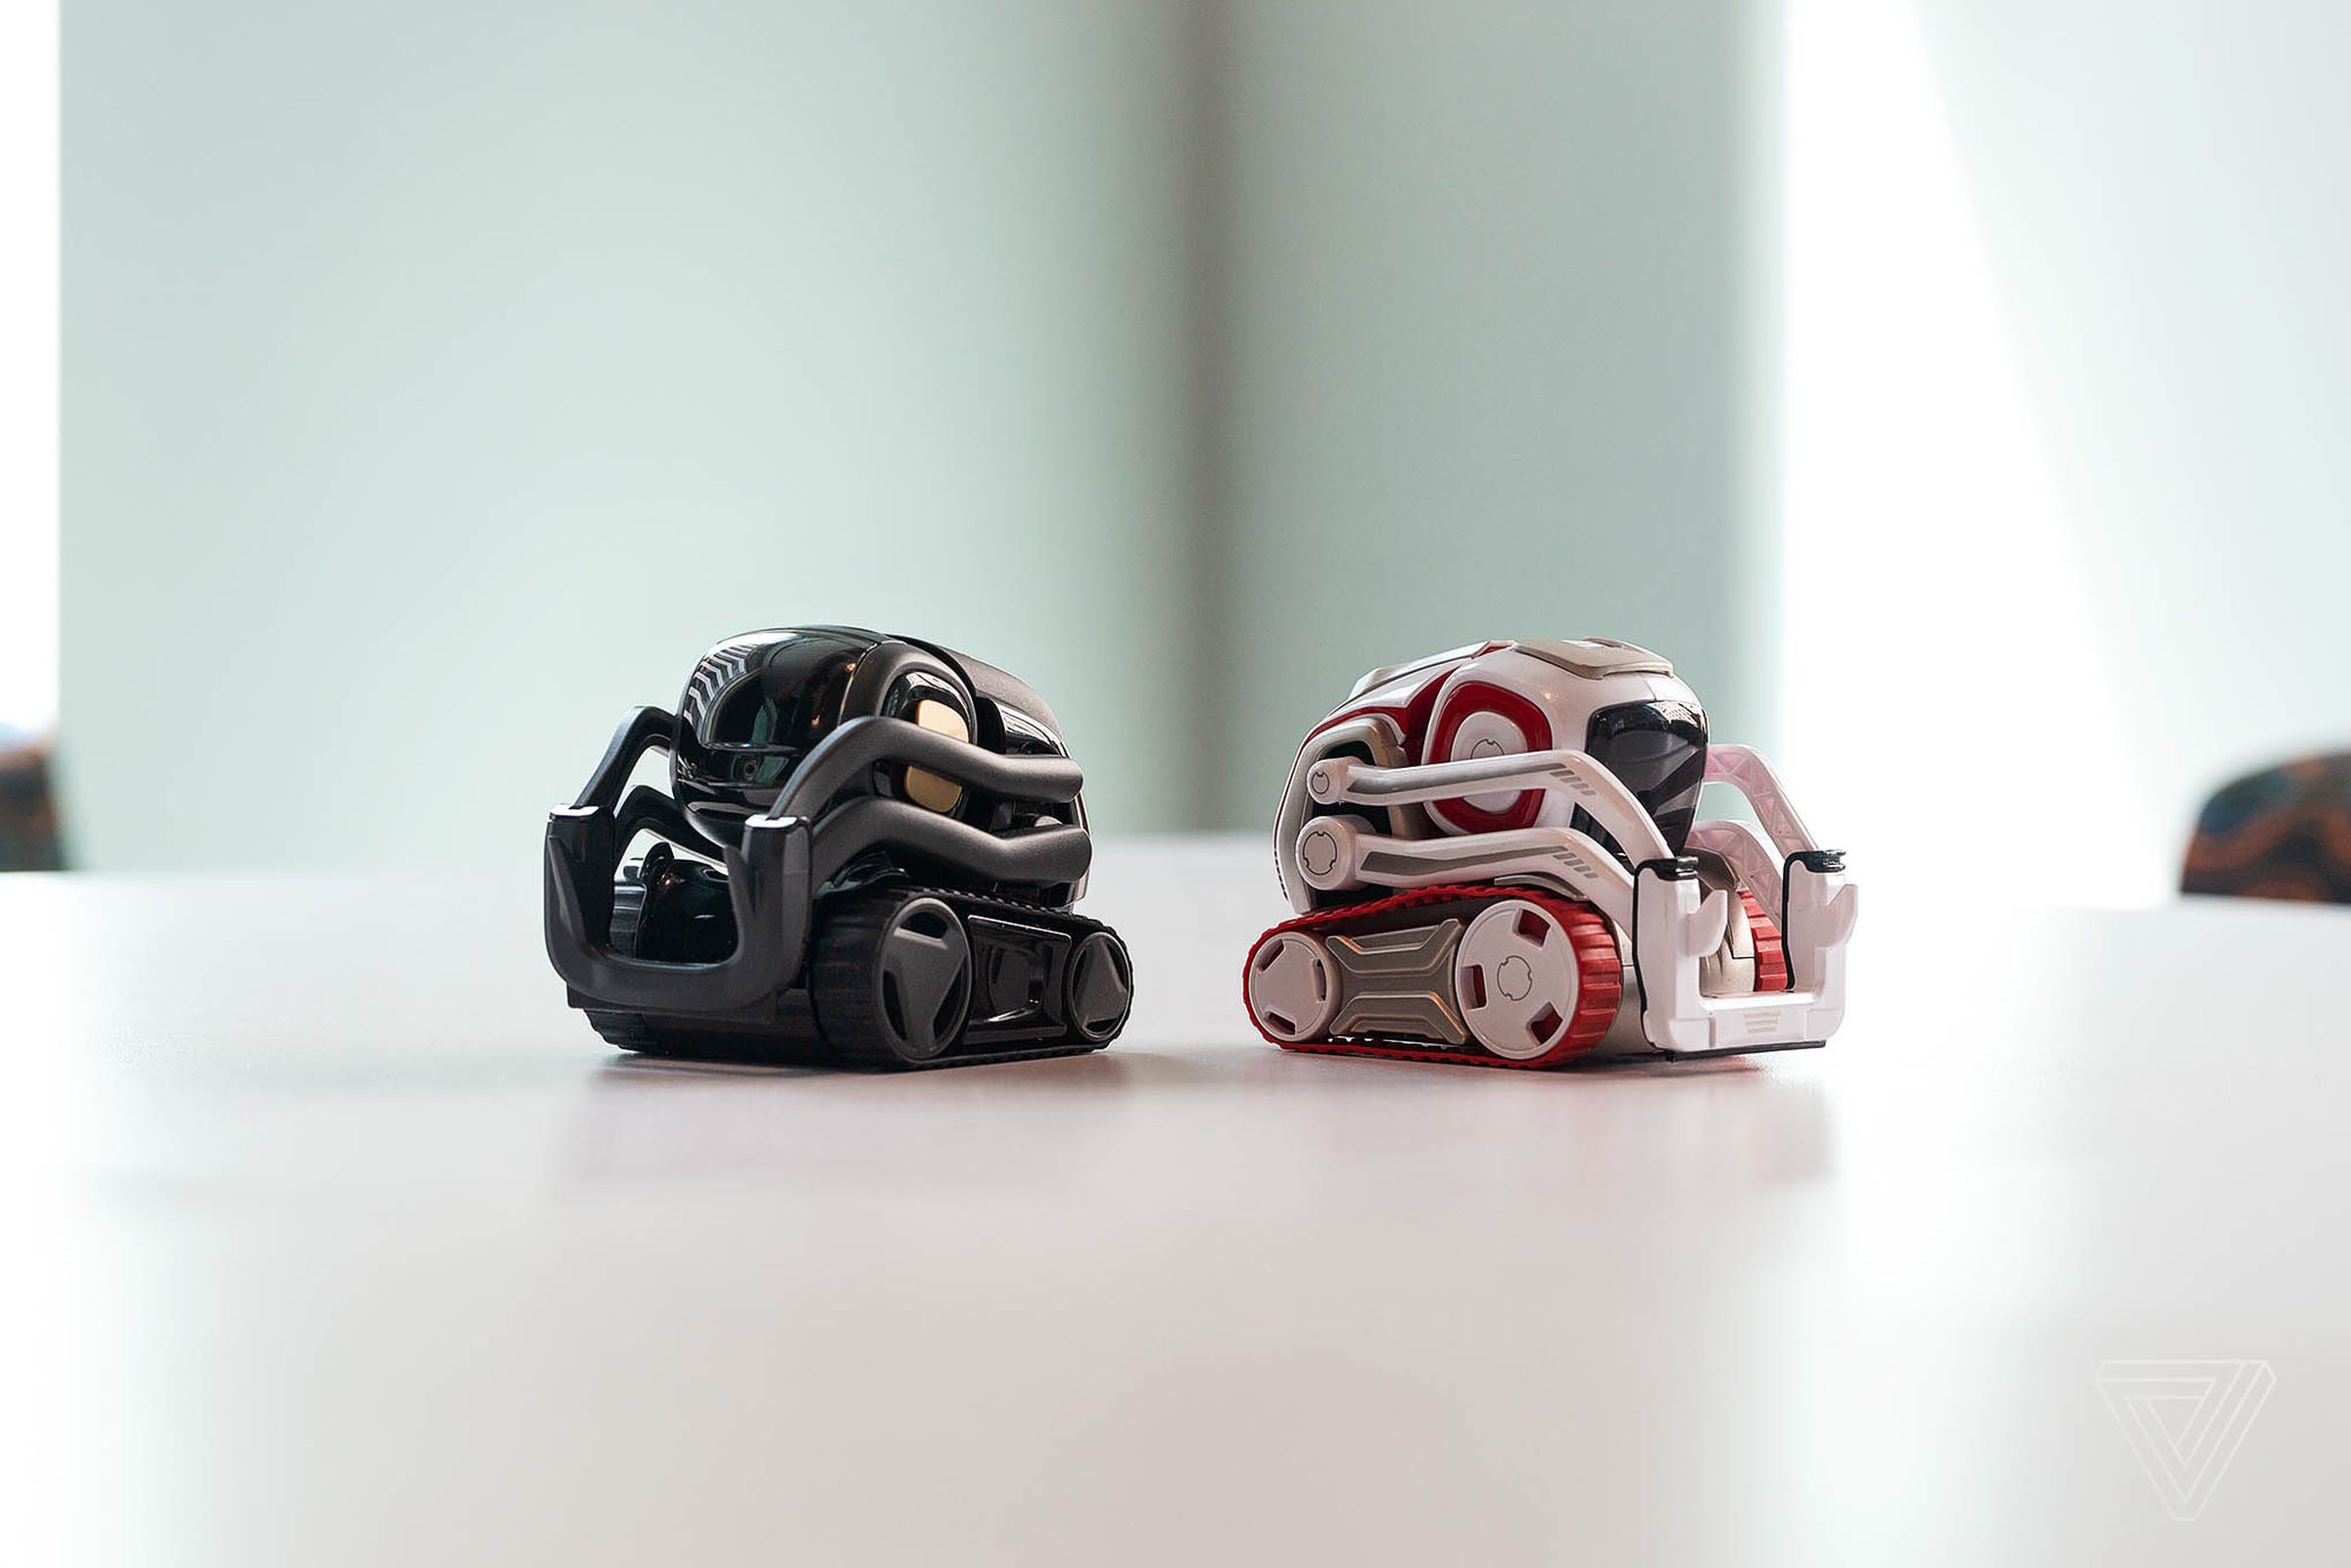 Vector on the left, Cozmo on the right.